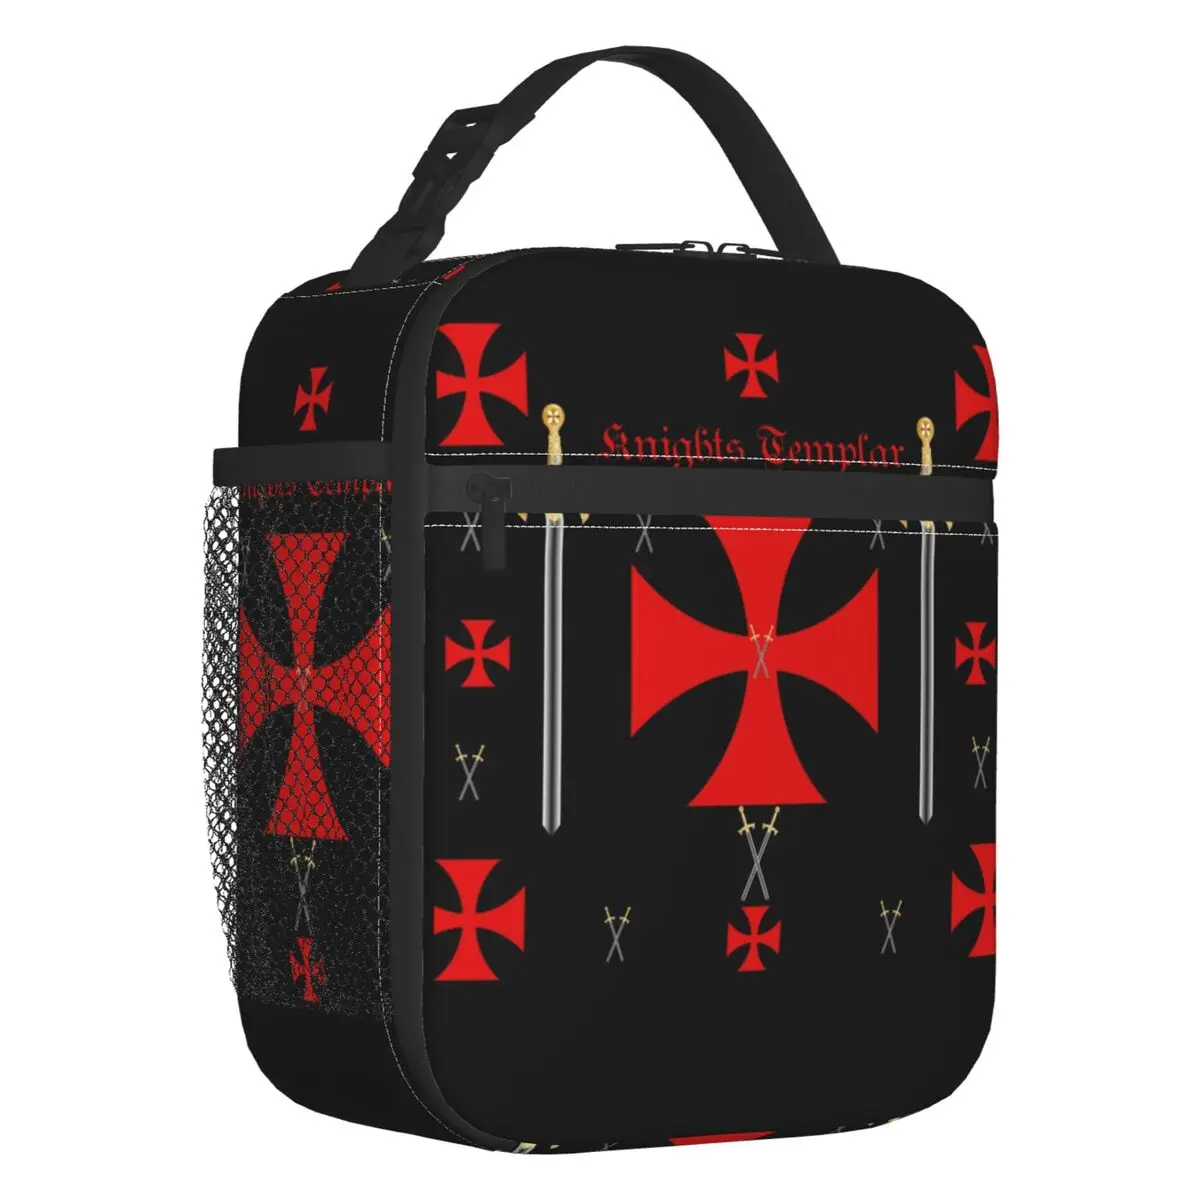 

Medieval Emblem Knights Templar Thermal Insulated Lunch Bags Ordre du Temple Cross Portable Lunch Tote for Kids Storage Food Box